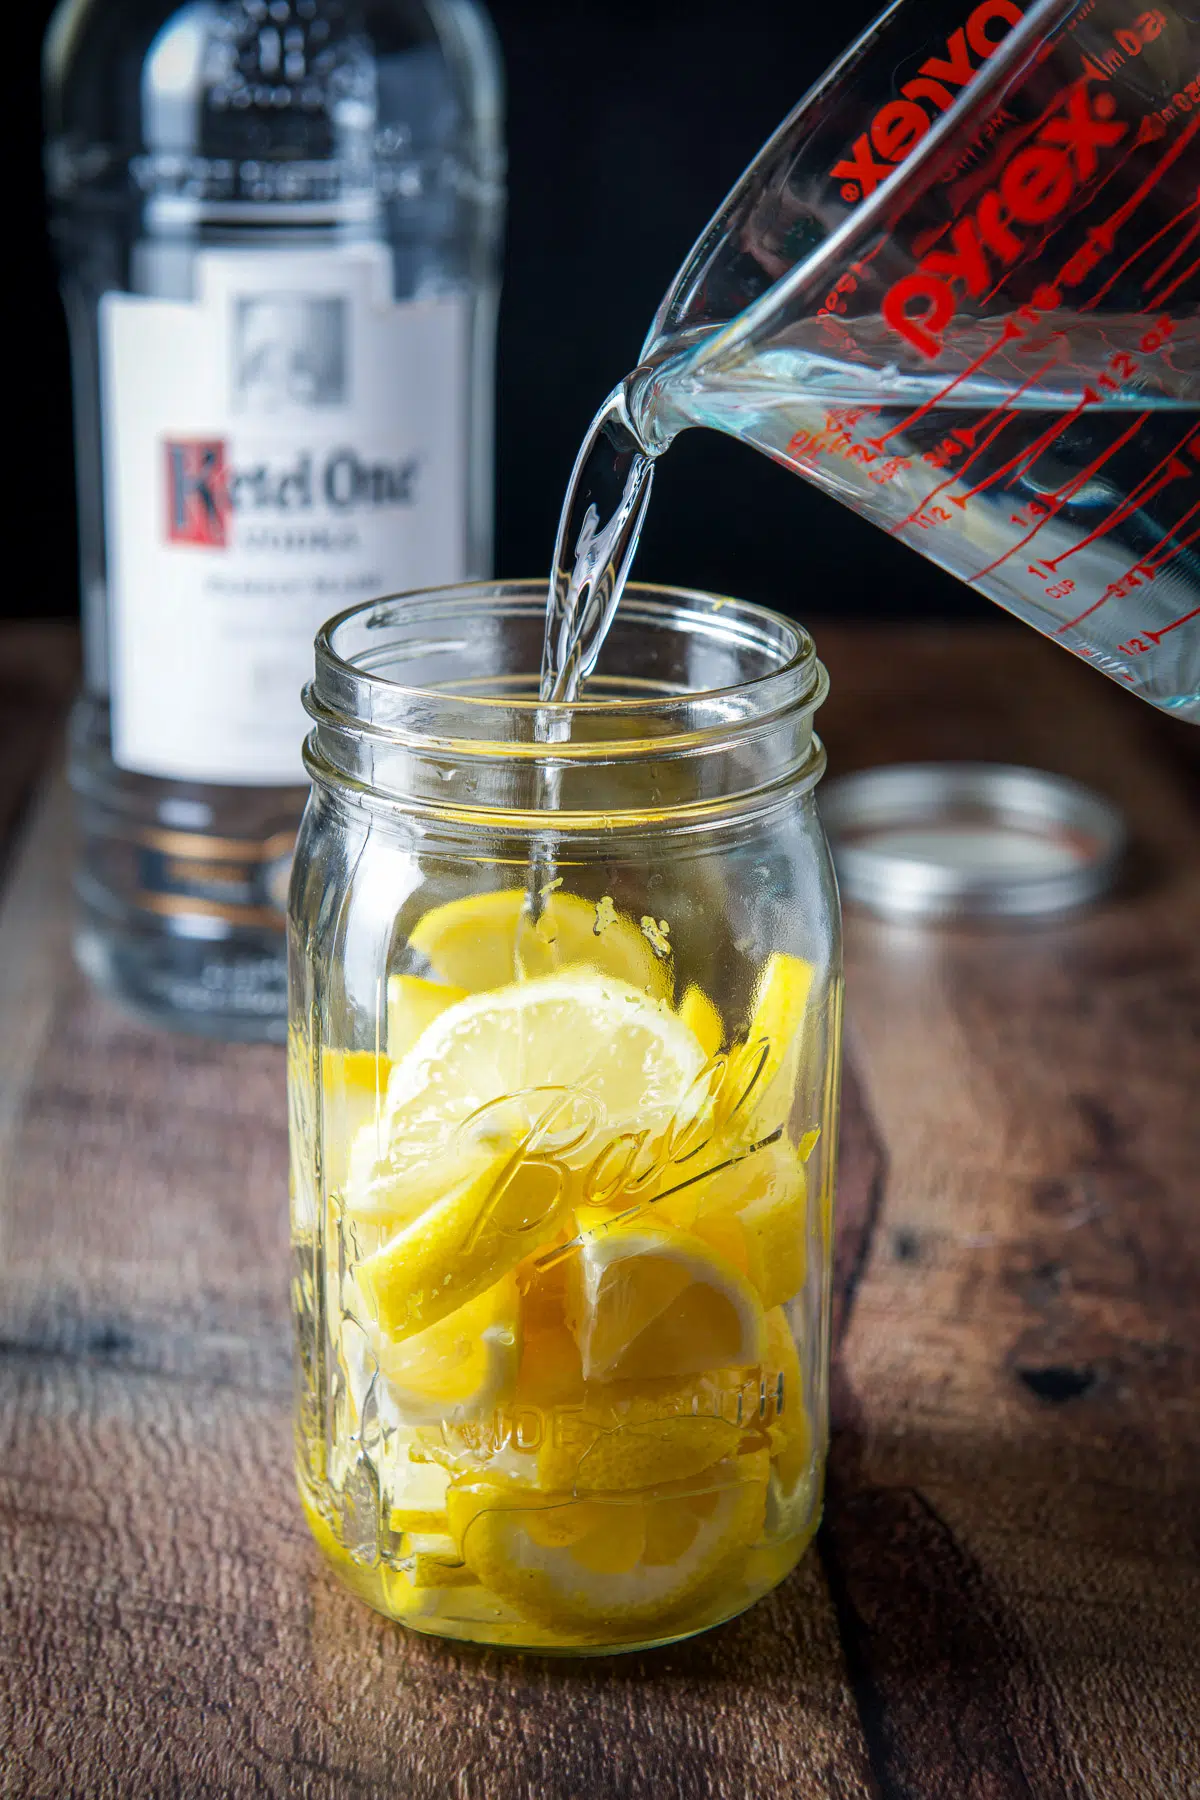 Pouring the vodka in the jar with the lemons